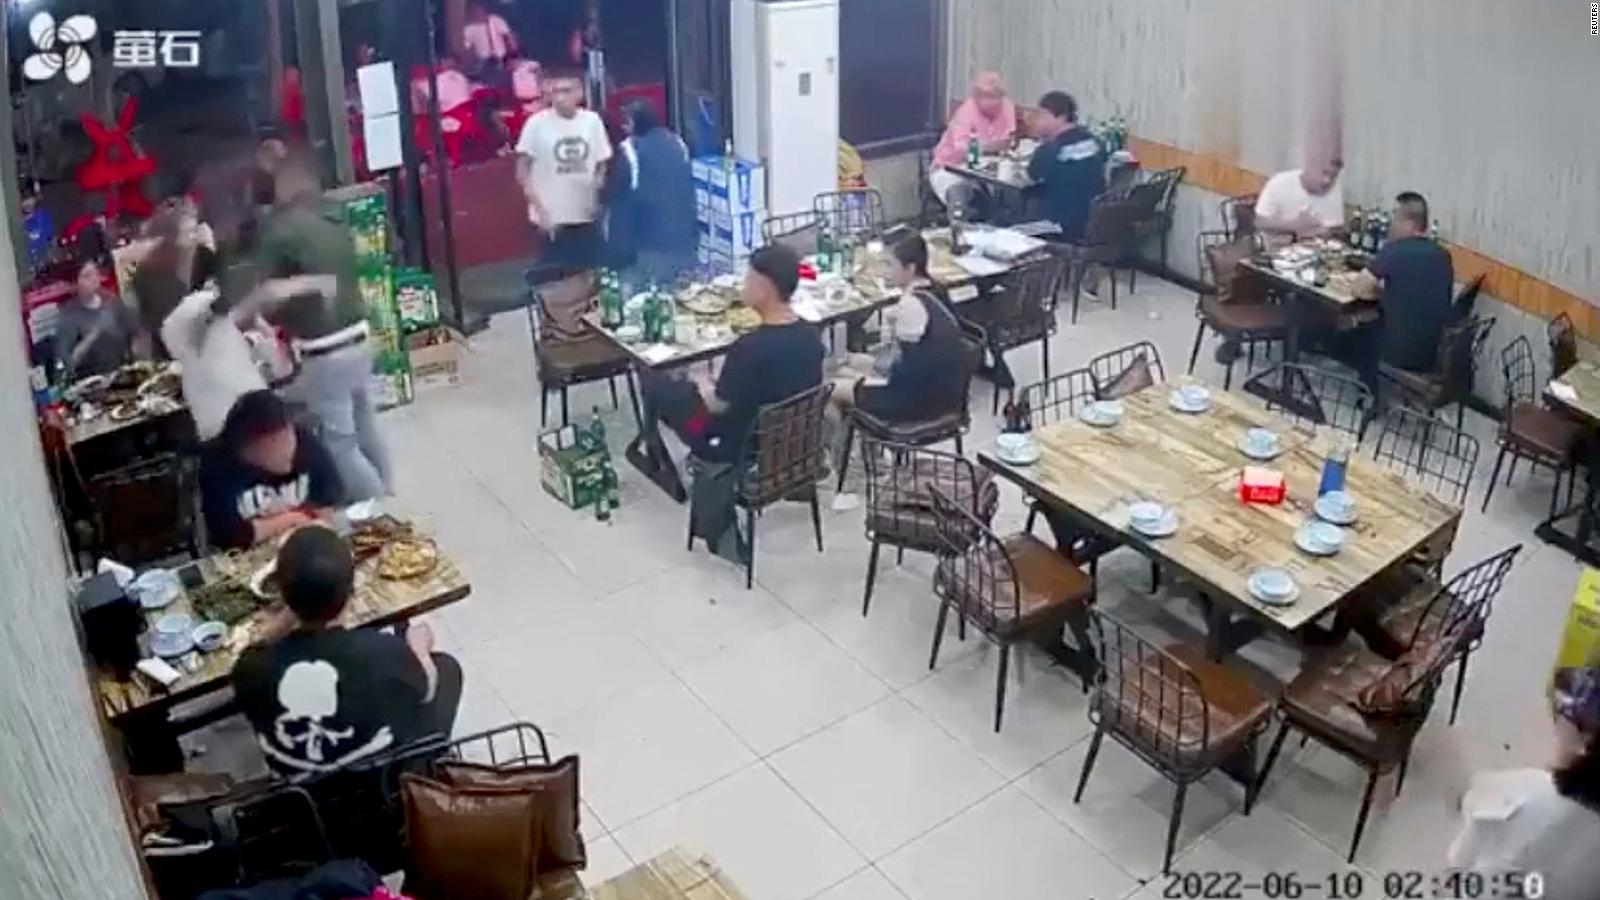 Video showing women being brutally attacked sparks national outrage in China